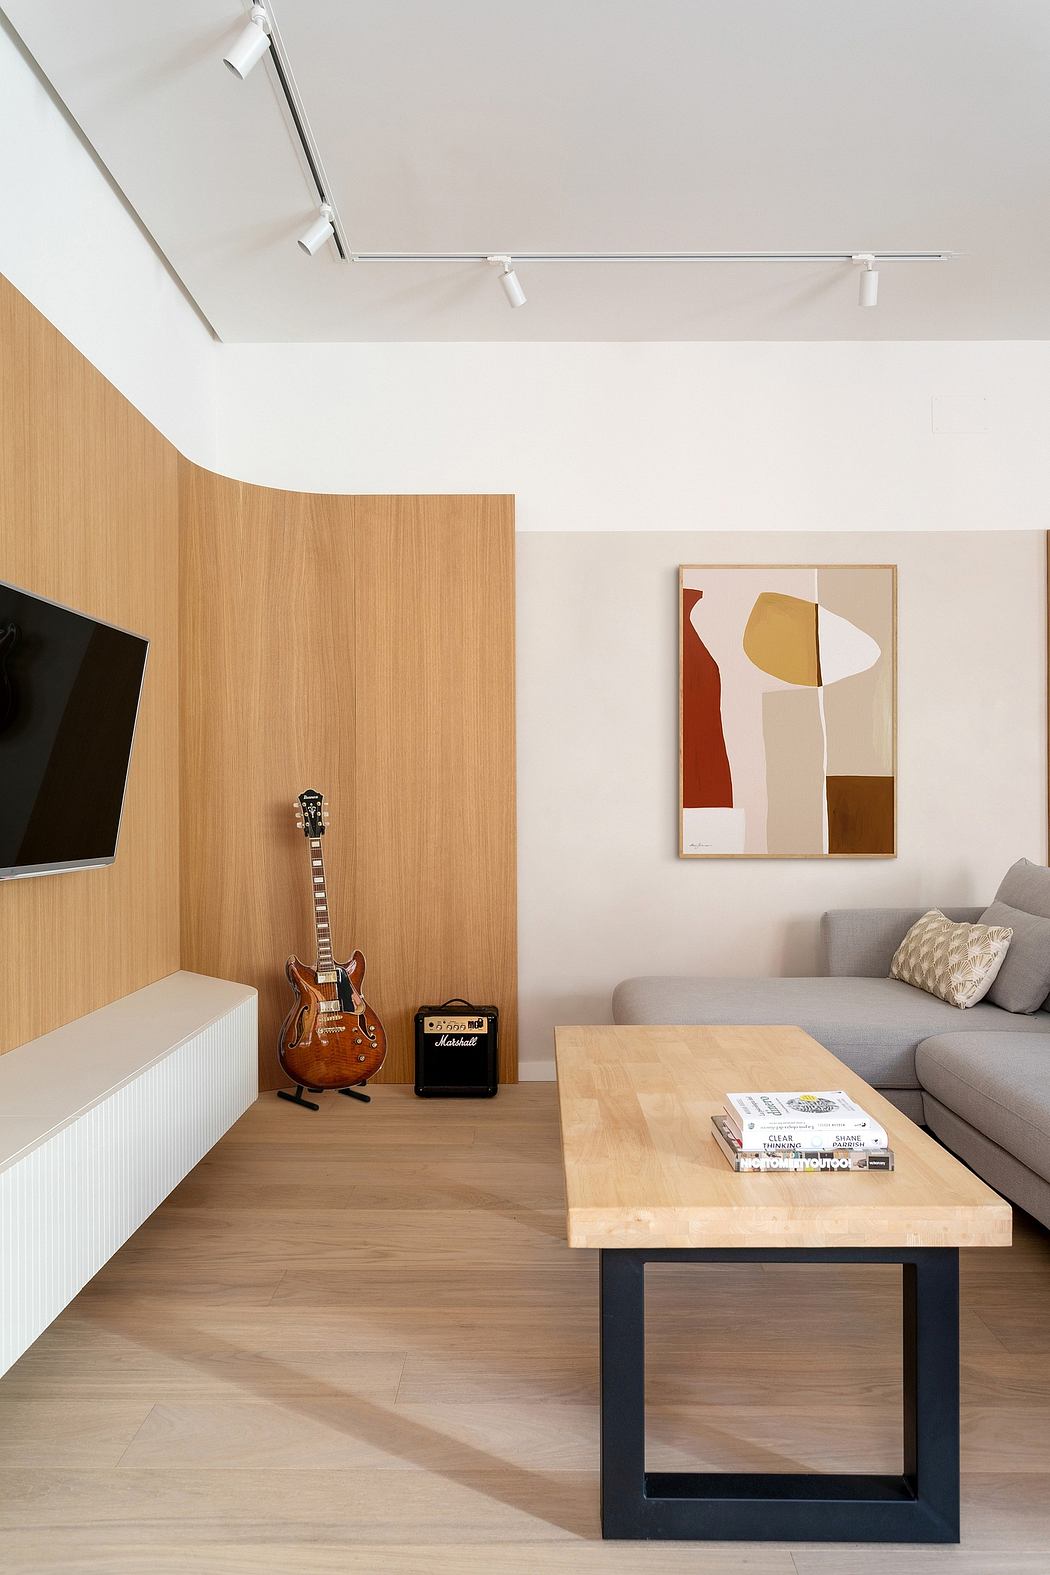 Minimalist living room with wooden walls, abstract artwork, and a sleek coffee table.